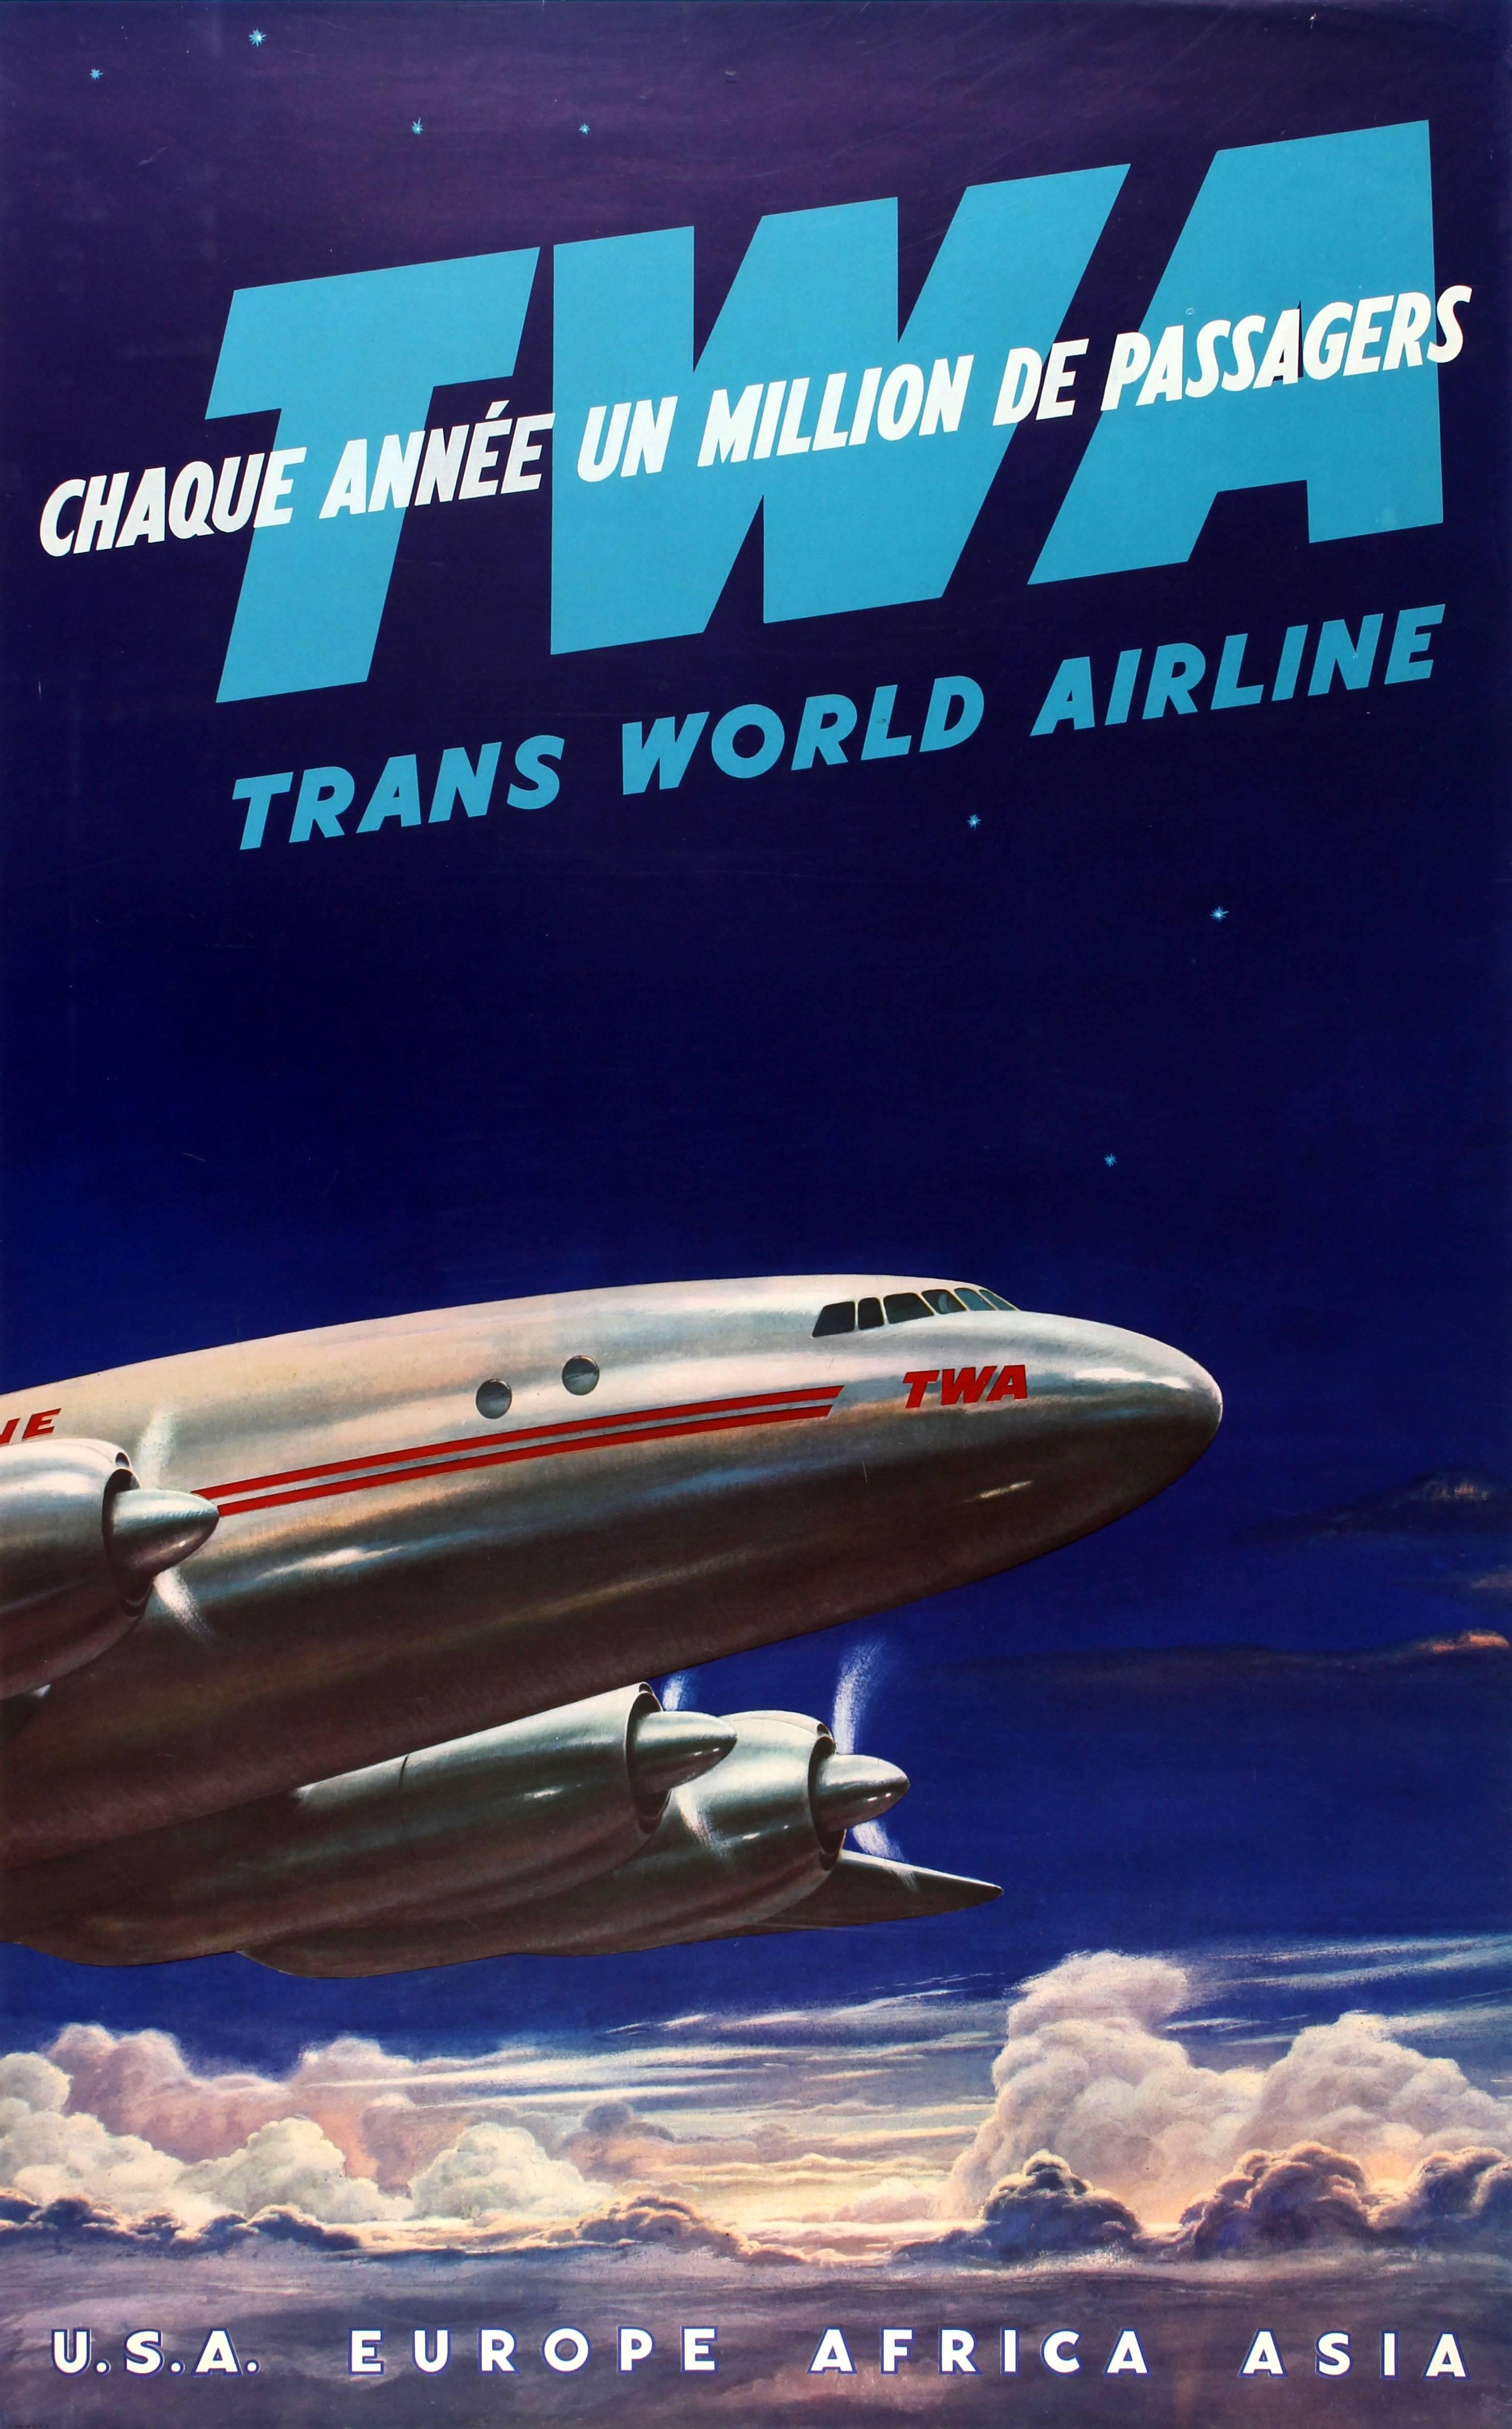 Unknown Print - Original Vintage TWA Trans World Airline Travel Poster - USA Europe Africa Asia